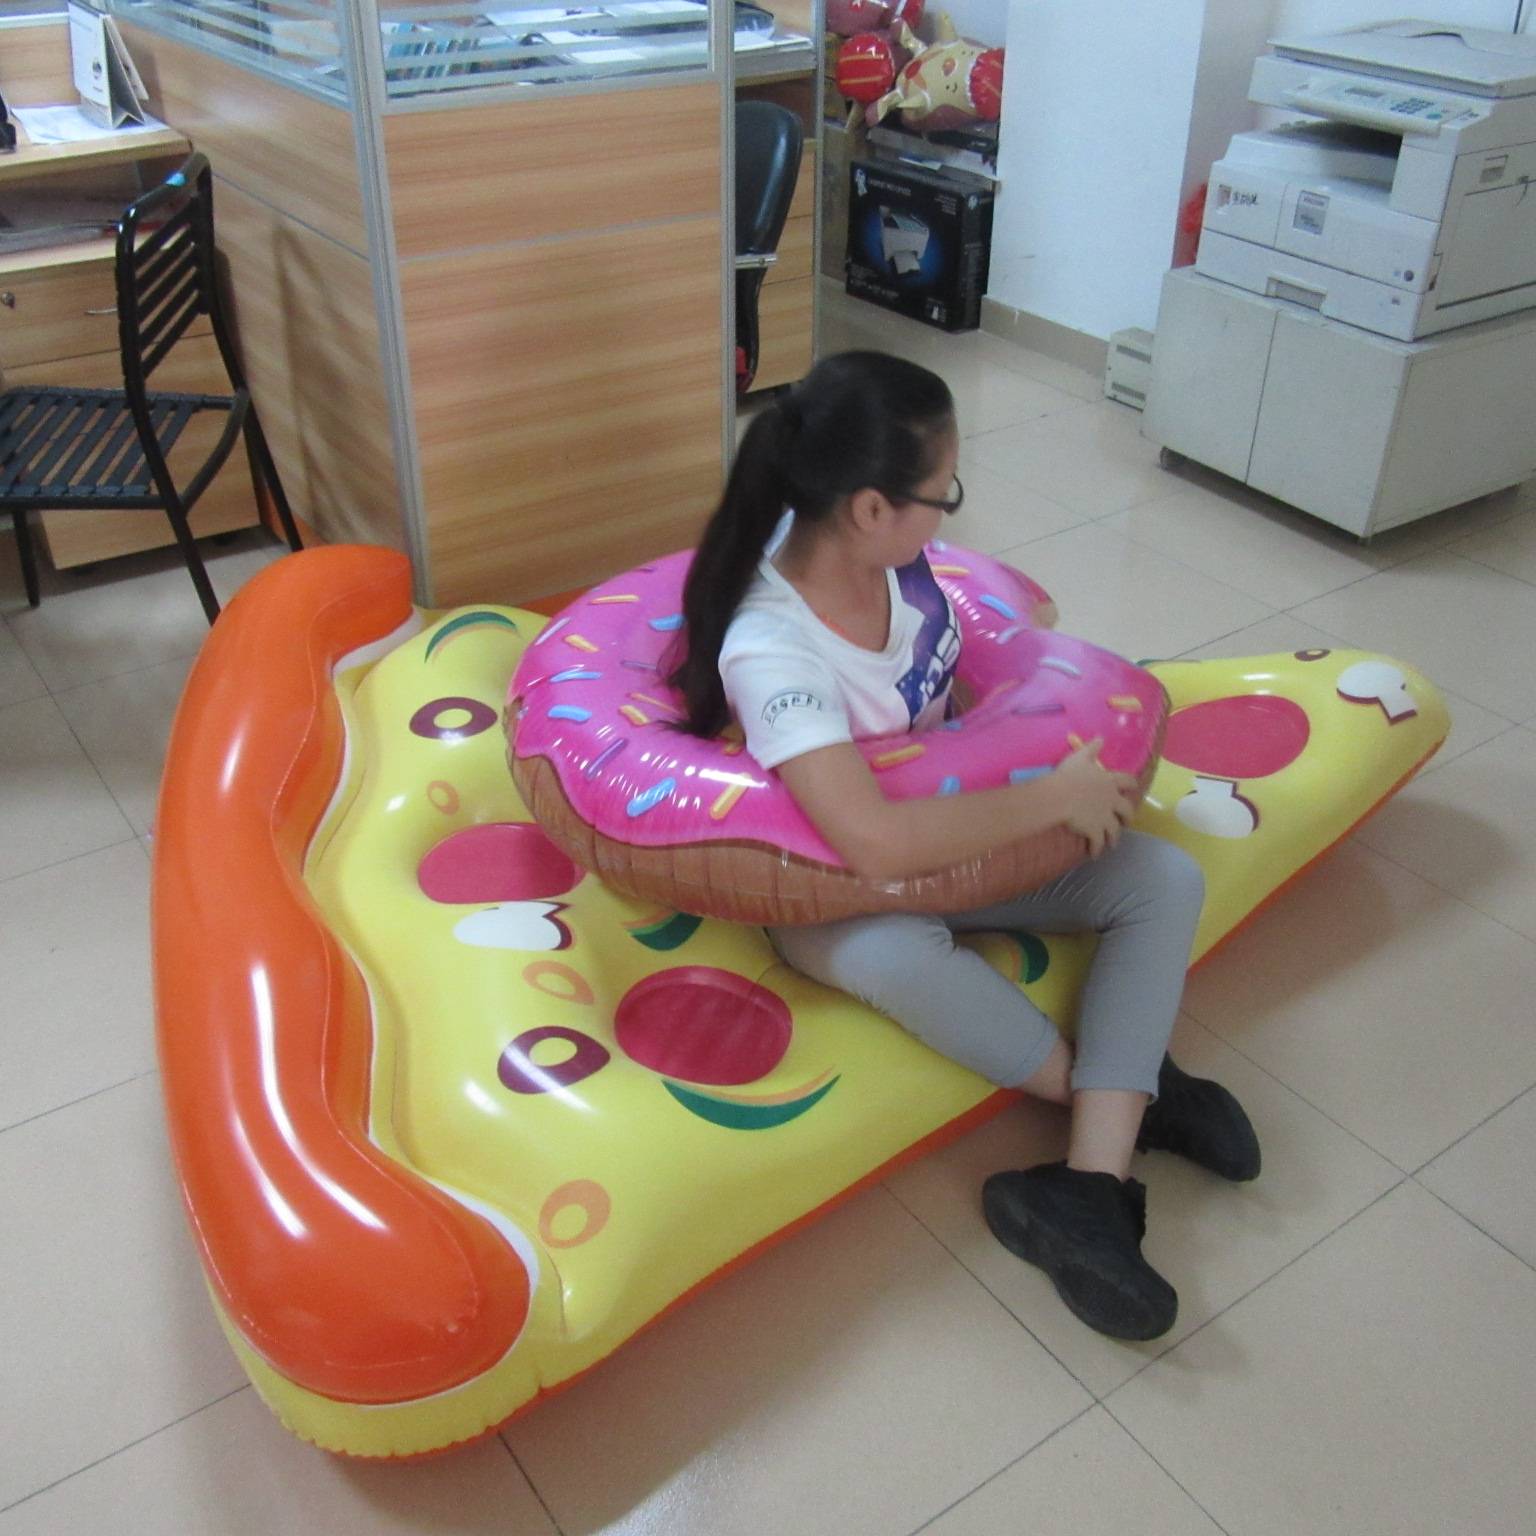 Inflatable Pizza Pool Float 175Cm